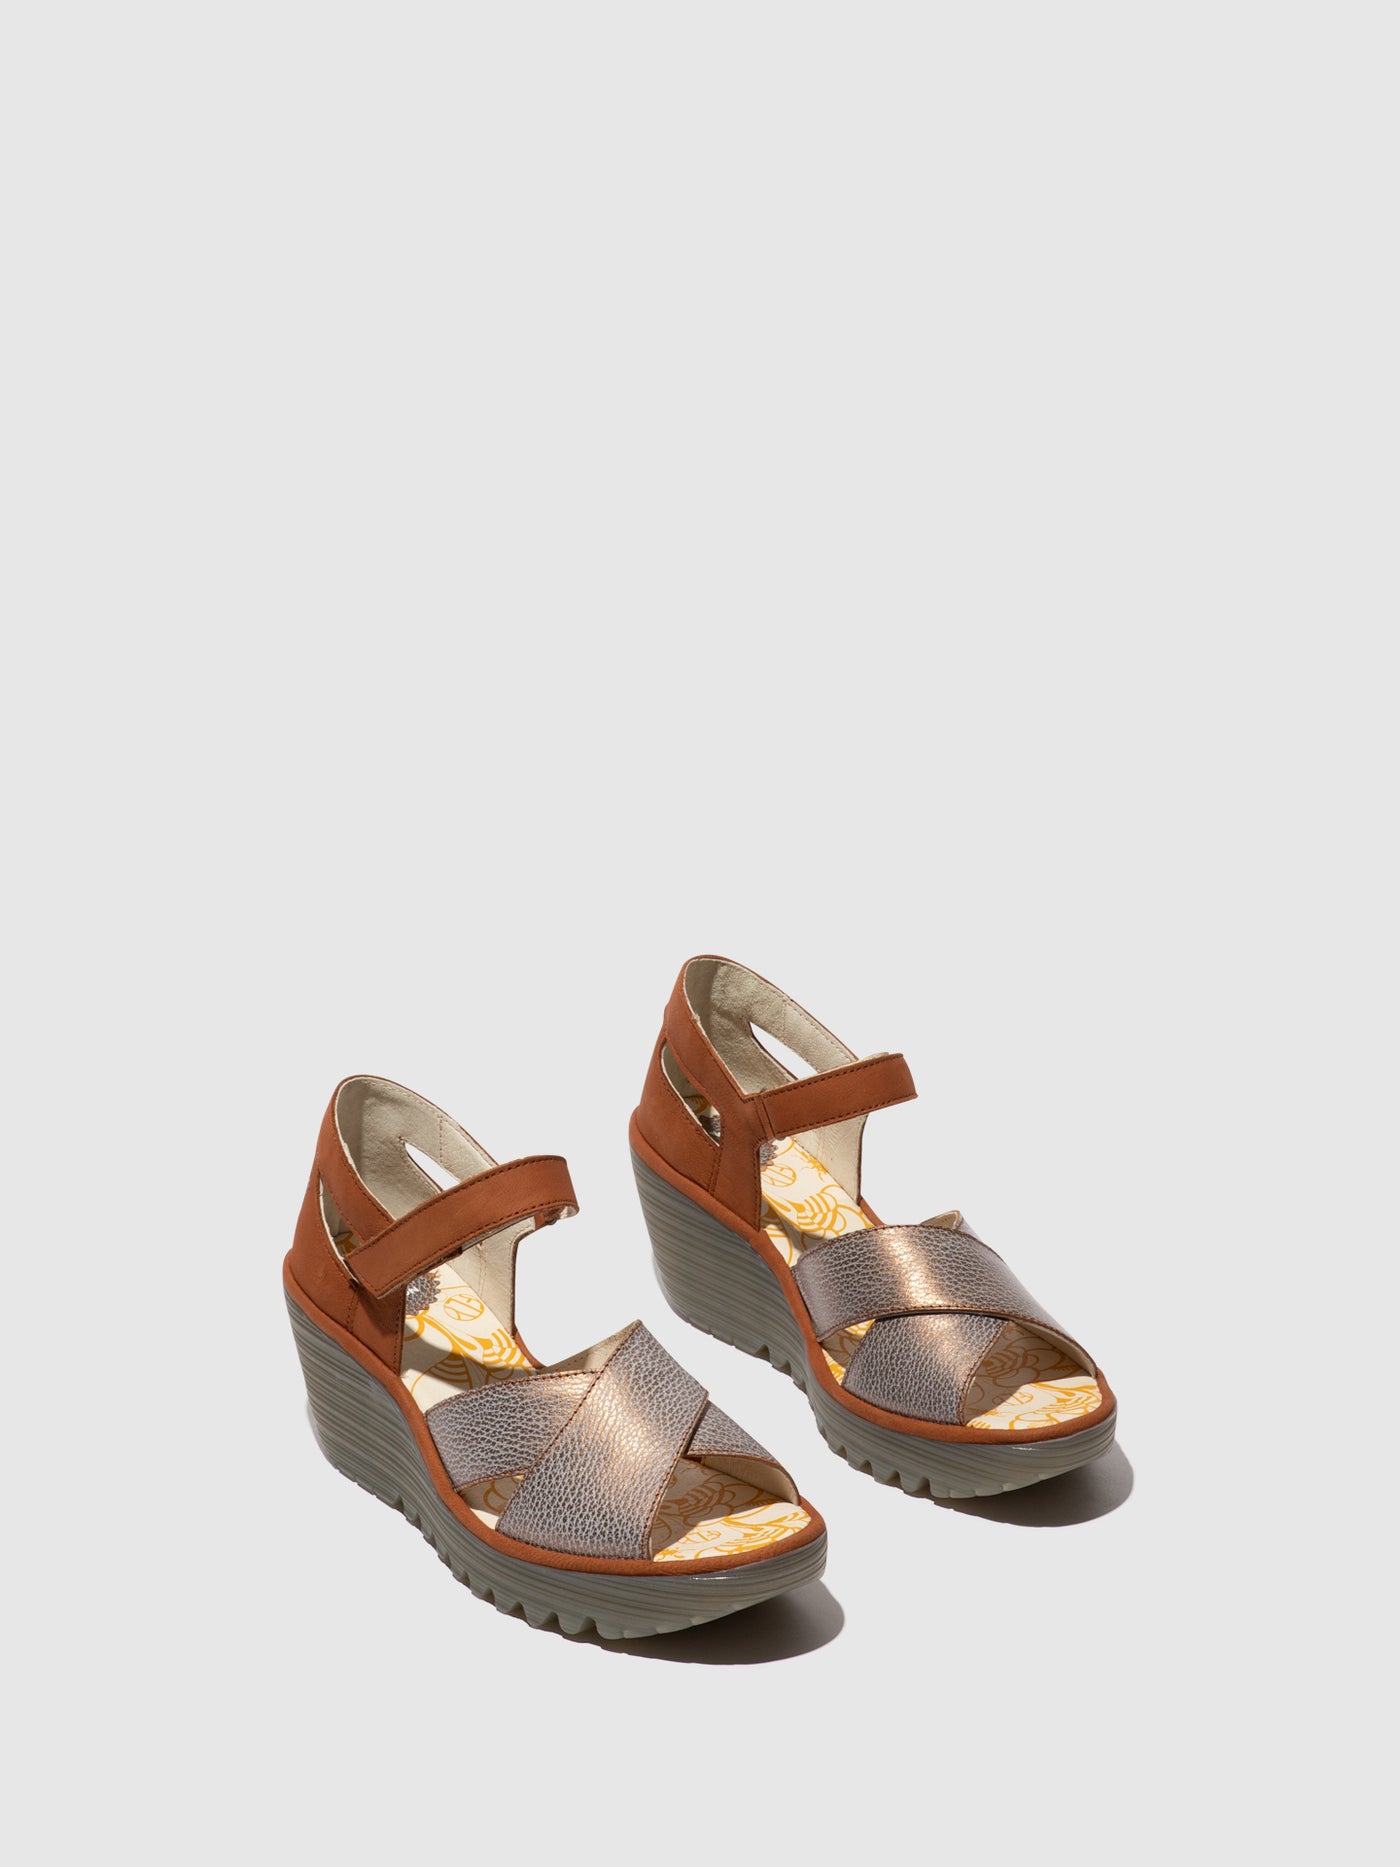 Ankle Strap Sandals YENT365FLY BRONZE/TAN